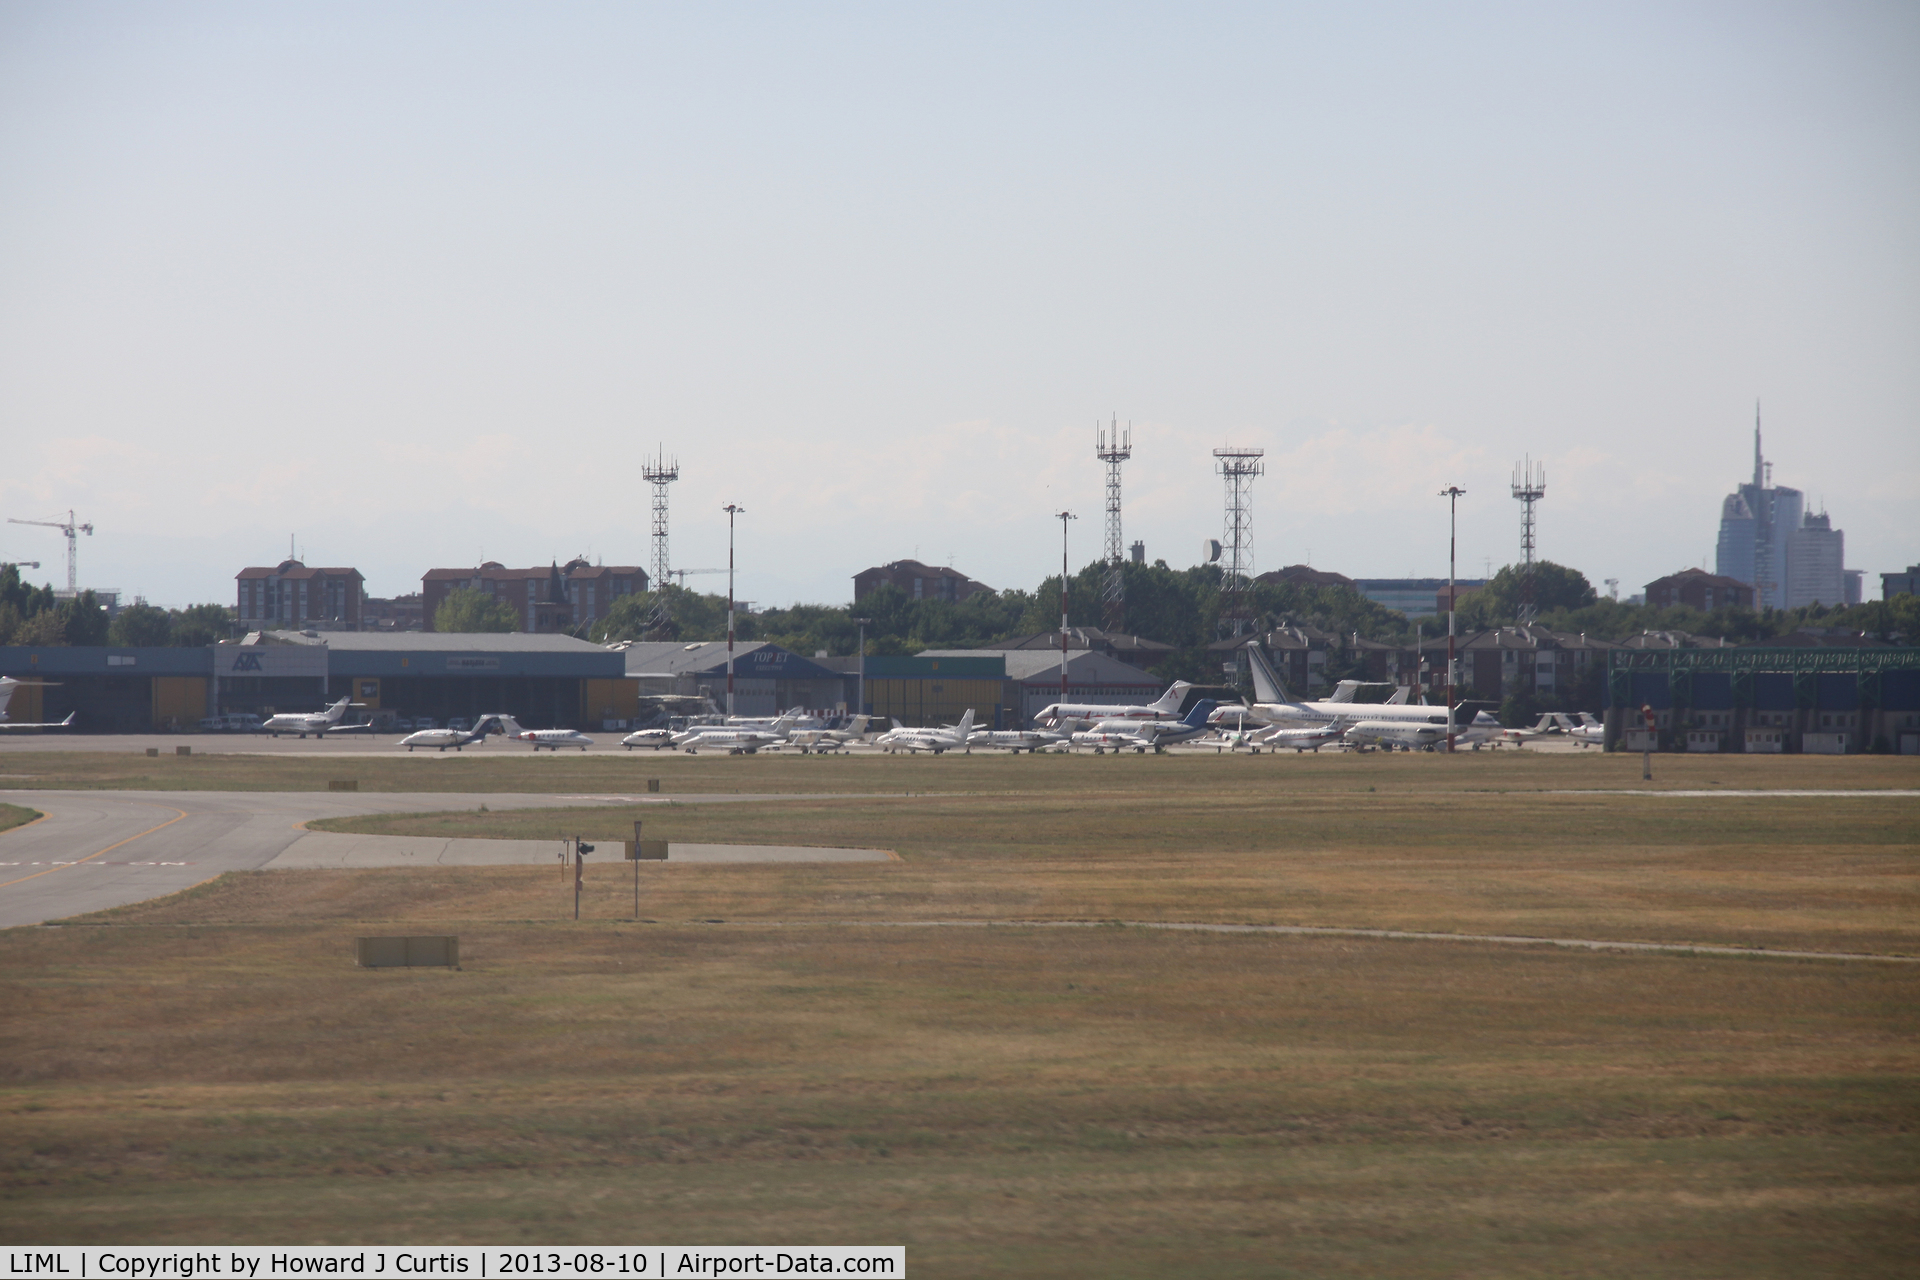 Linate Airport, Milan Italy (LIML) - LIML VIP area. (Yak-40 parked right of centre)